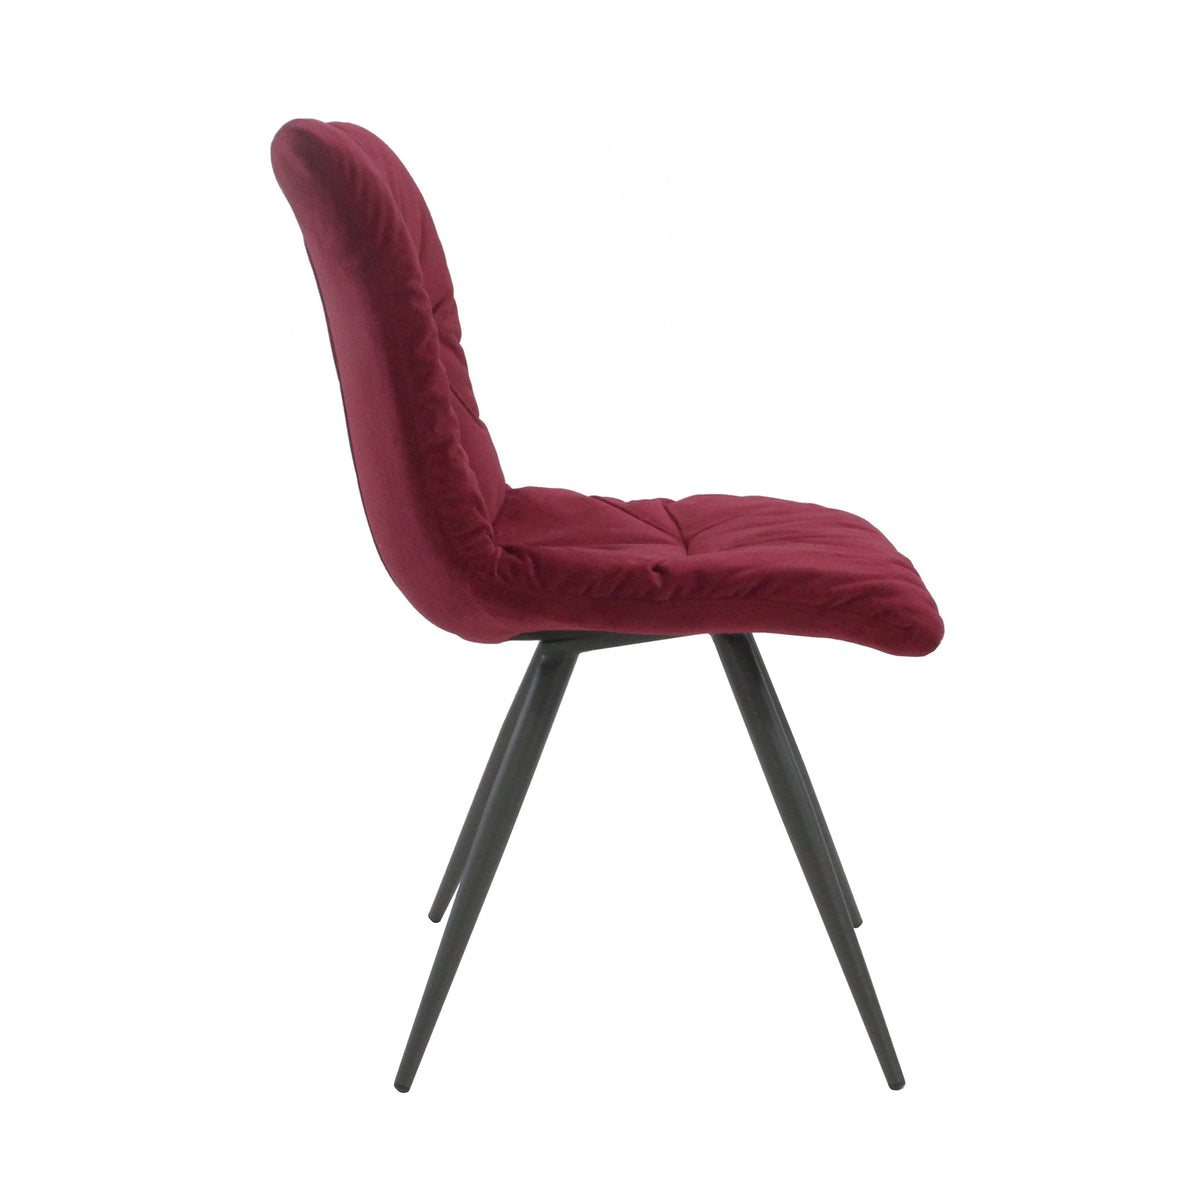 Addison Red Chair